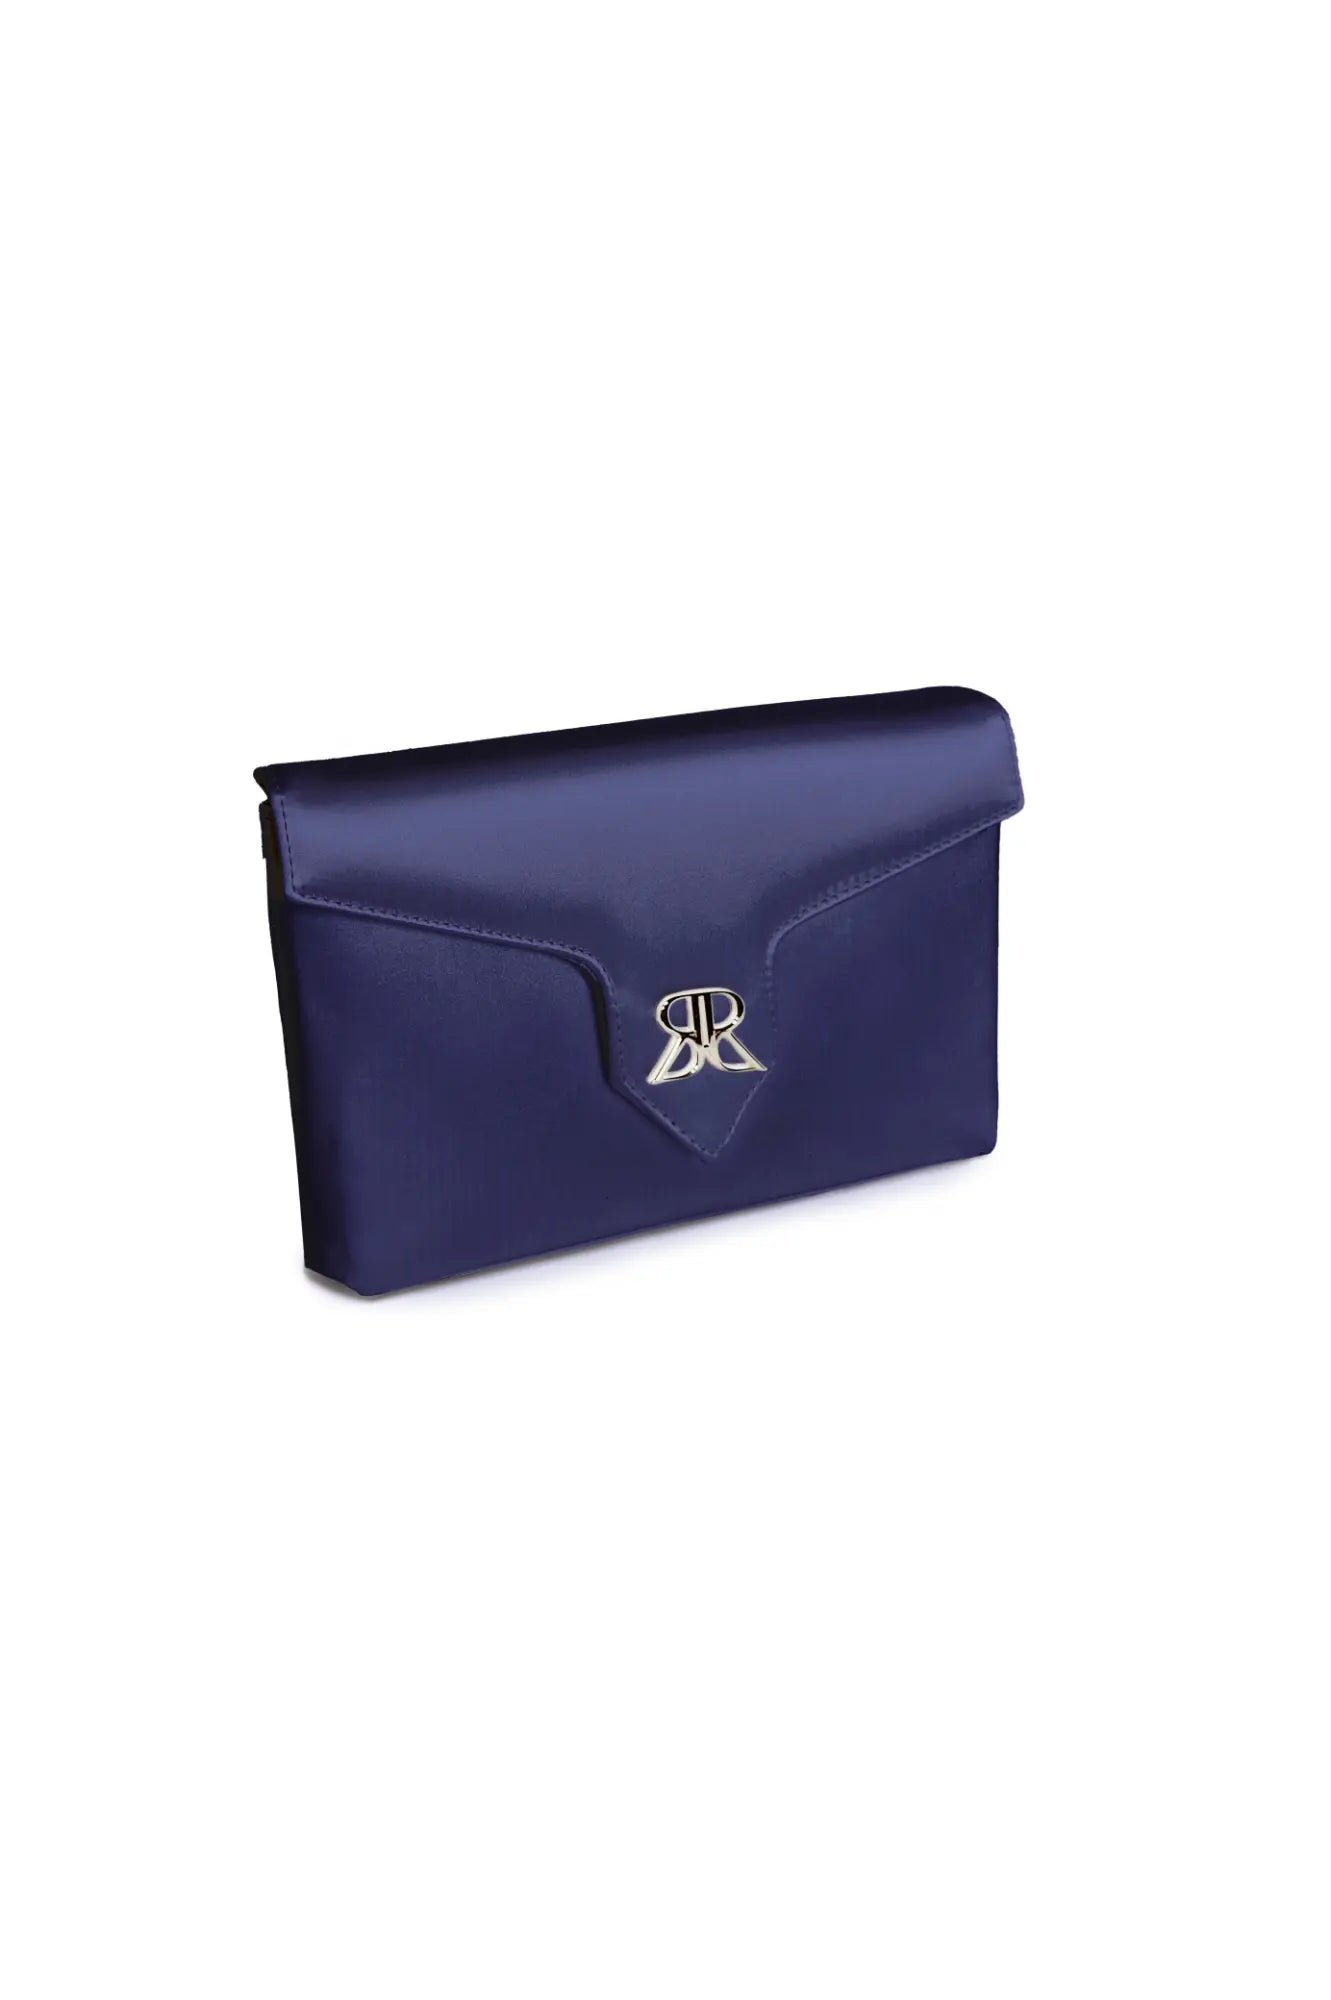 Duchess Satin navy blue Love Note Envelope Clutch with a metallic clasp on a white background. 
Product Name: Love Note Envelope Clutch Navy
Brand Name: The Bella Rosa Collection

Revised Sentence: Duchess Satin navy blue Love Note Envelope Clutch Navy with a metallic clasp on a white background by The Bella Rosa Collection.